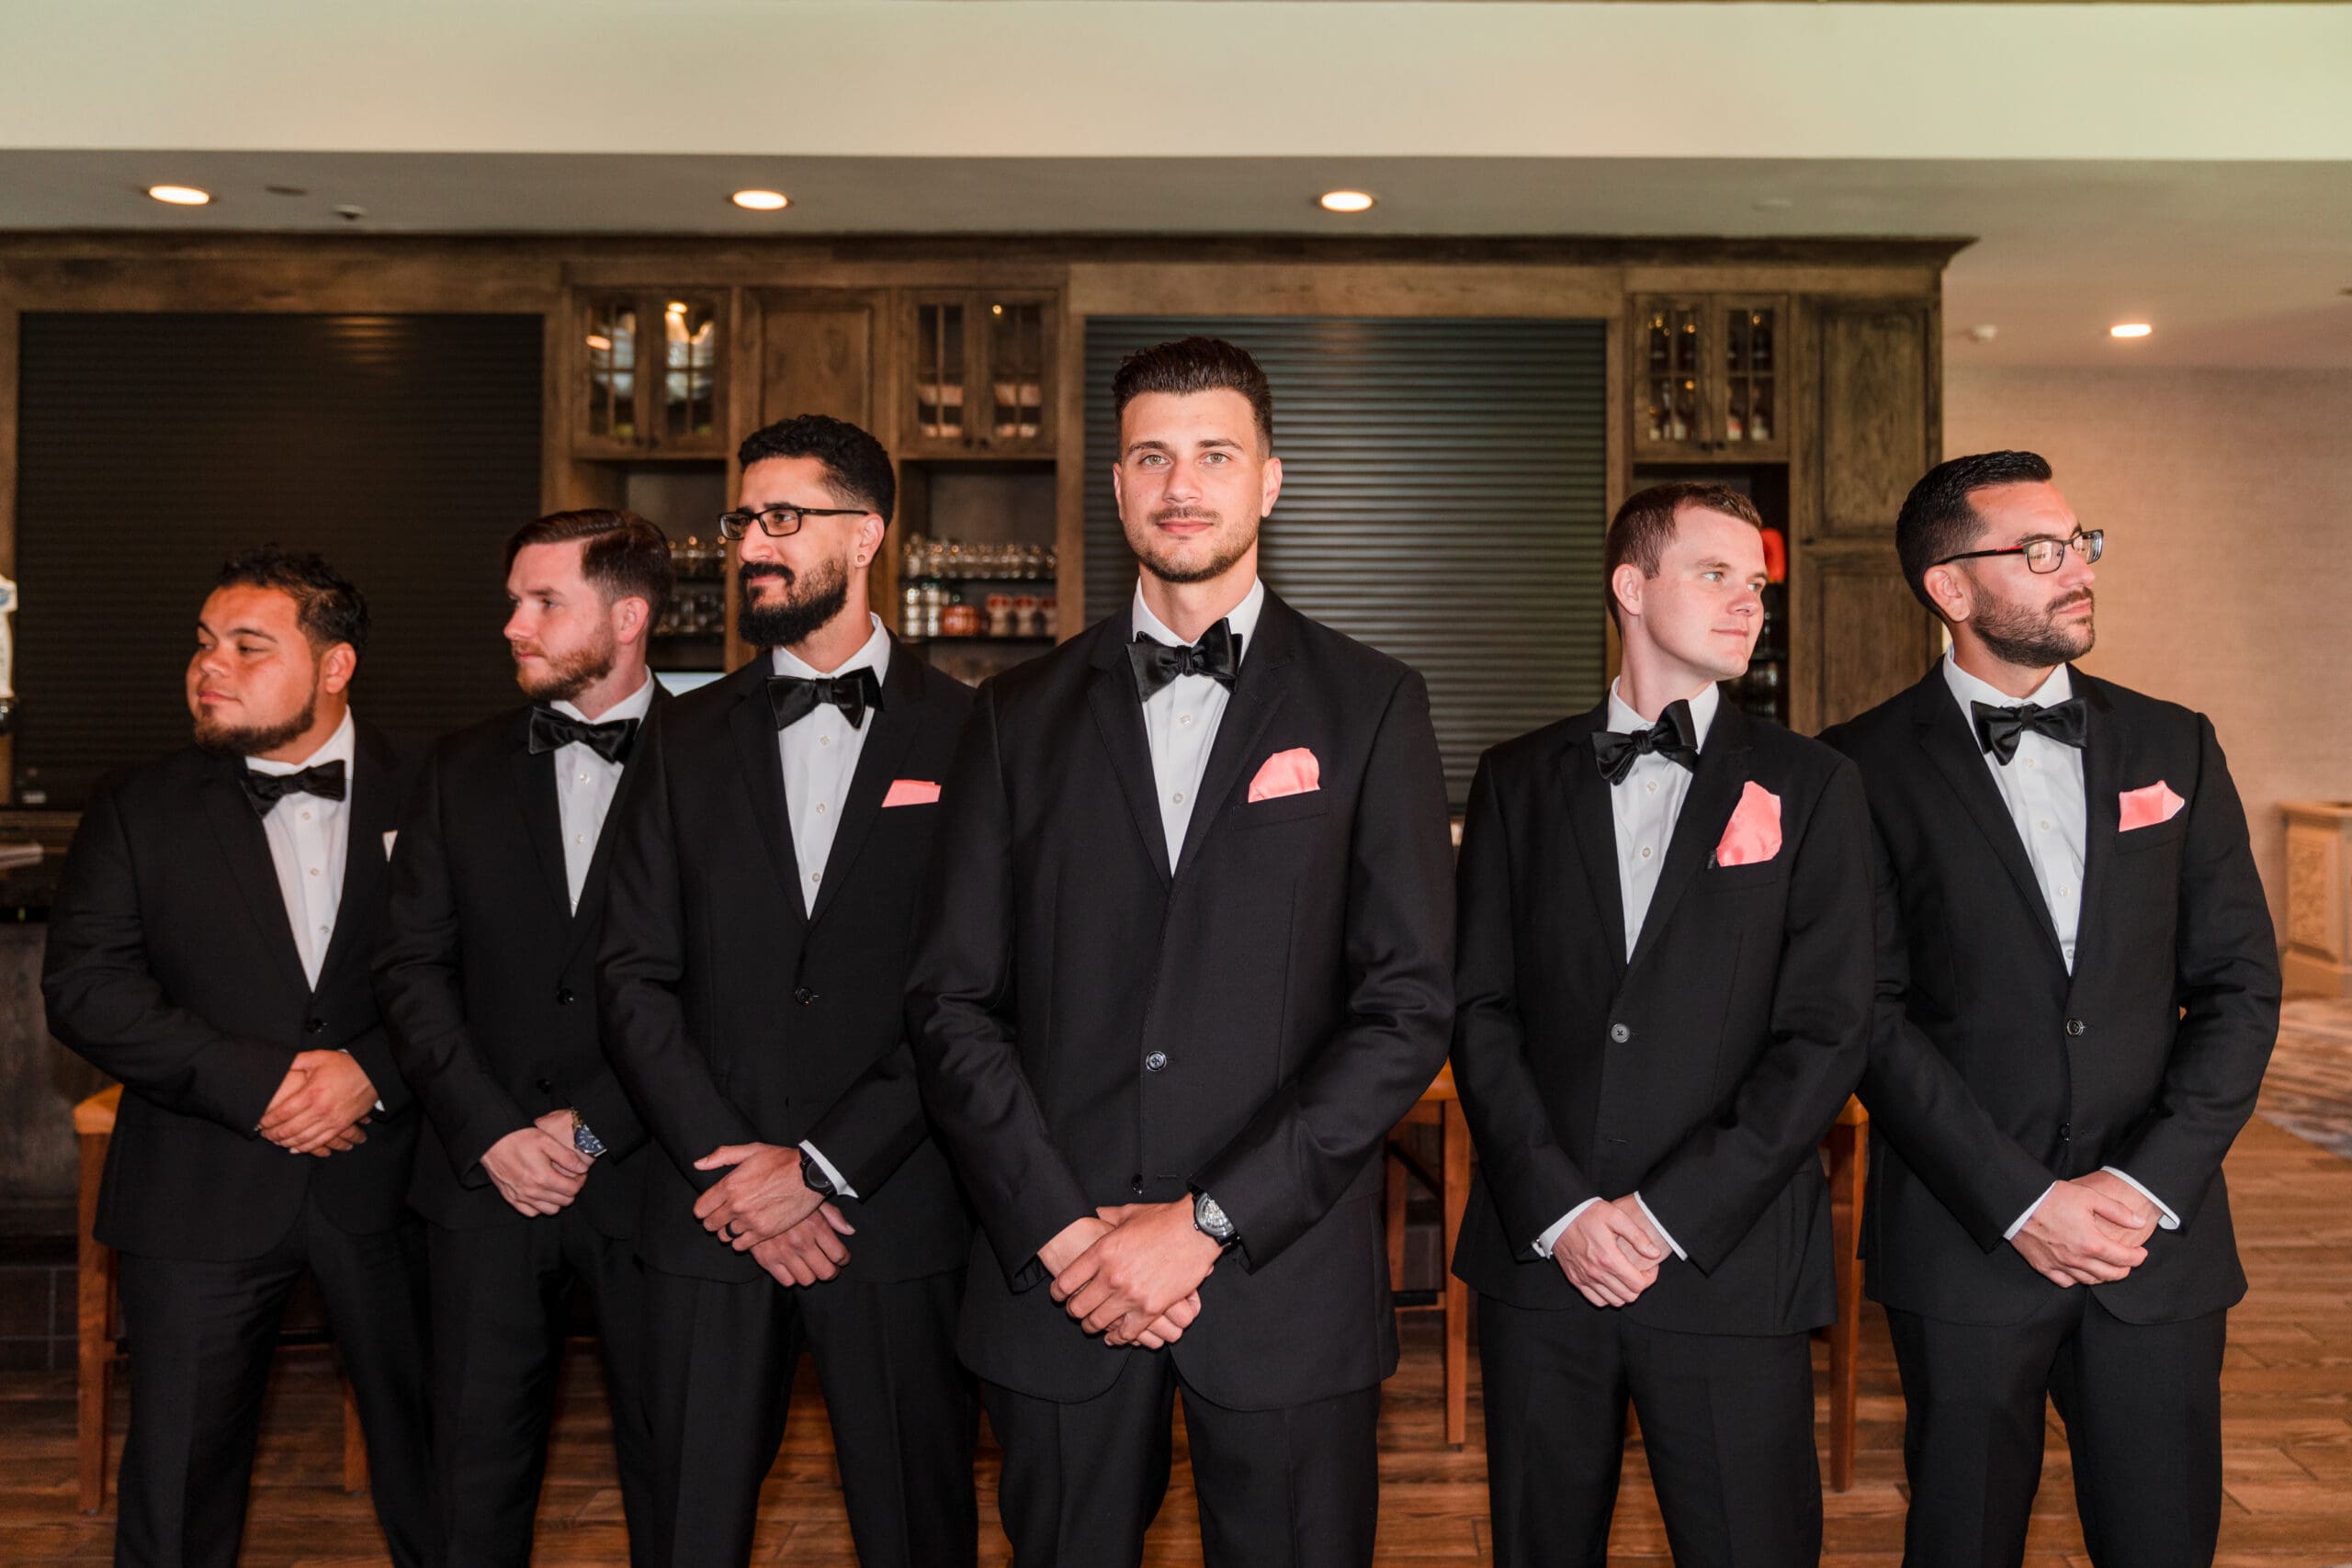 Javier and his five groomsmen posing for an epic picture, forming a V-shape with Javier at the center looking at the camera and the others looking in the distance.